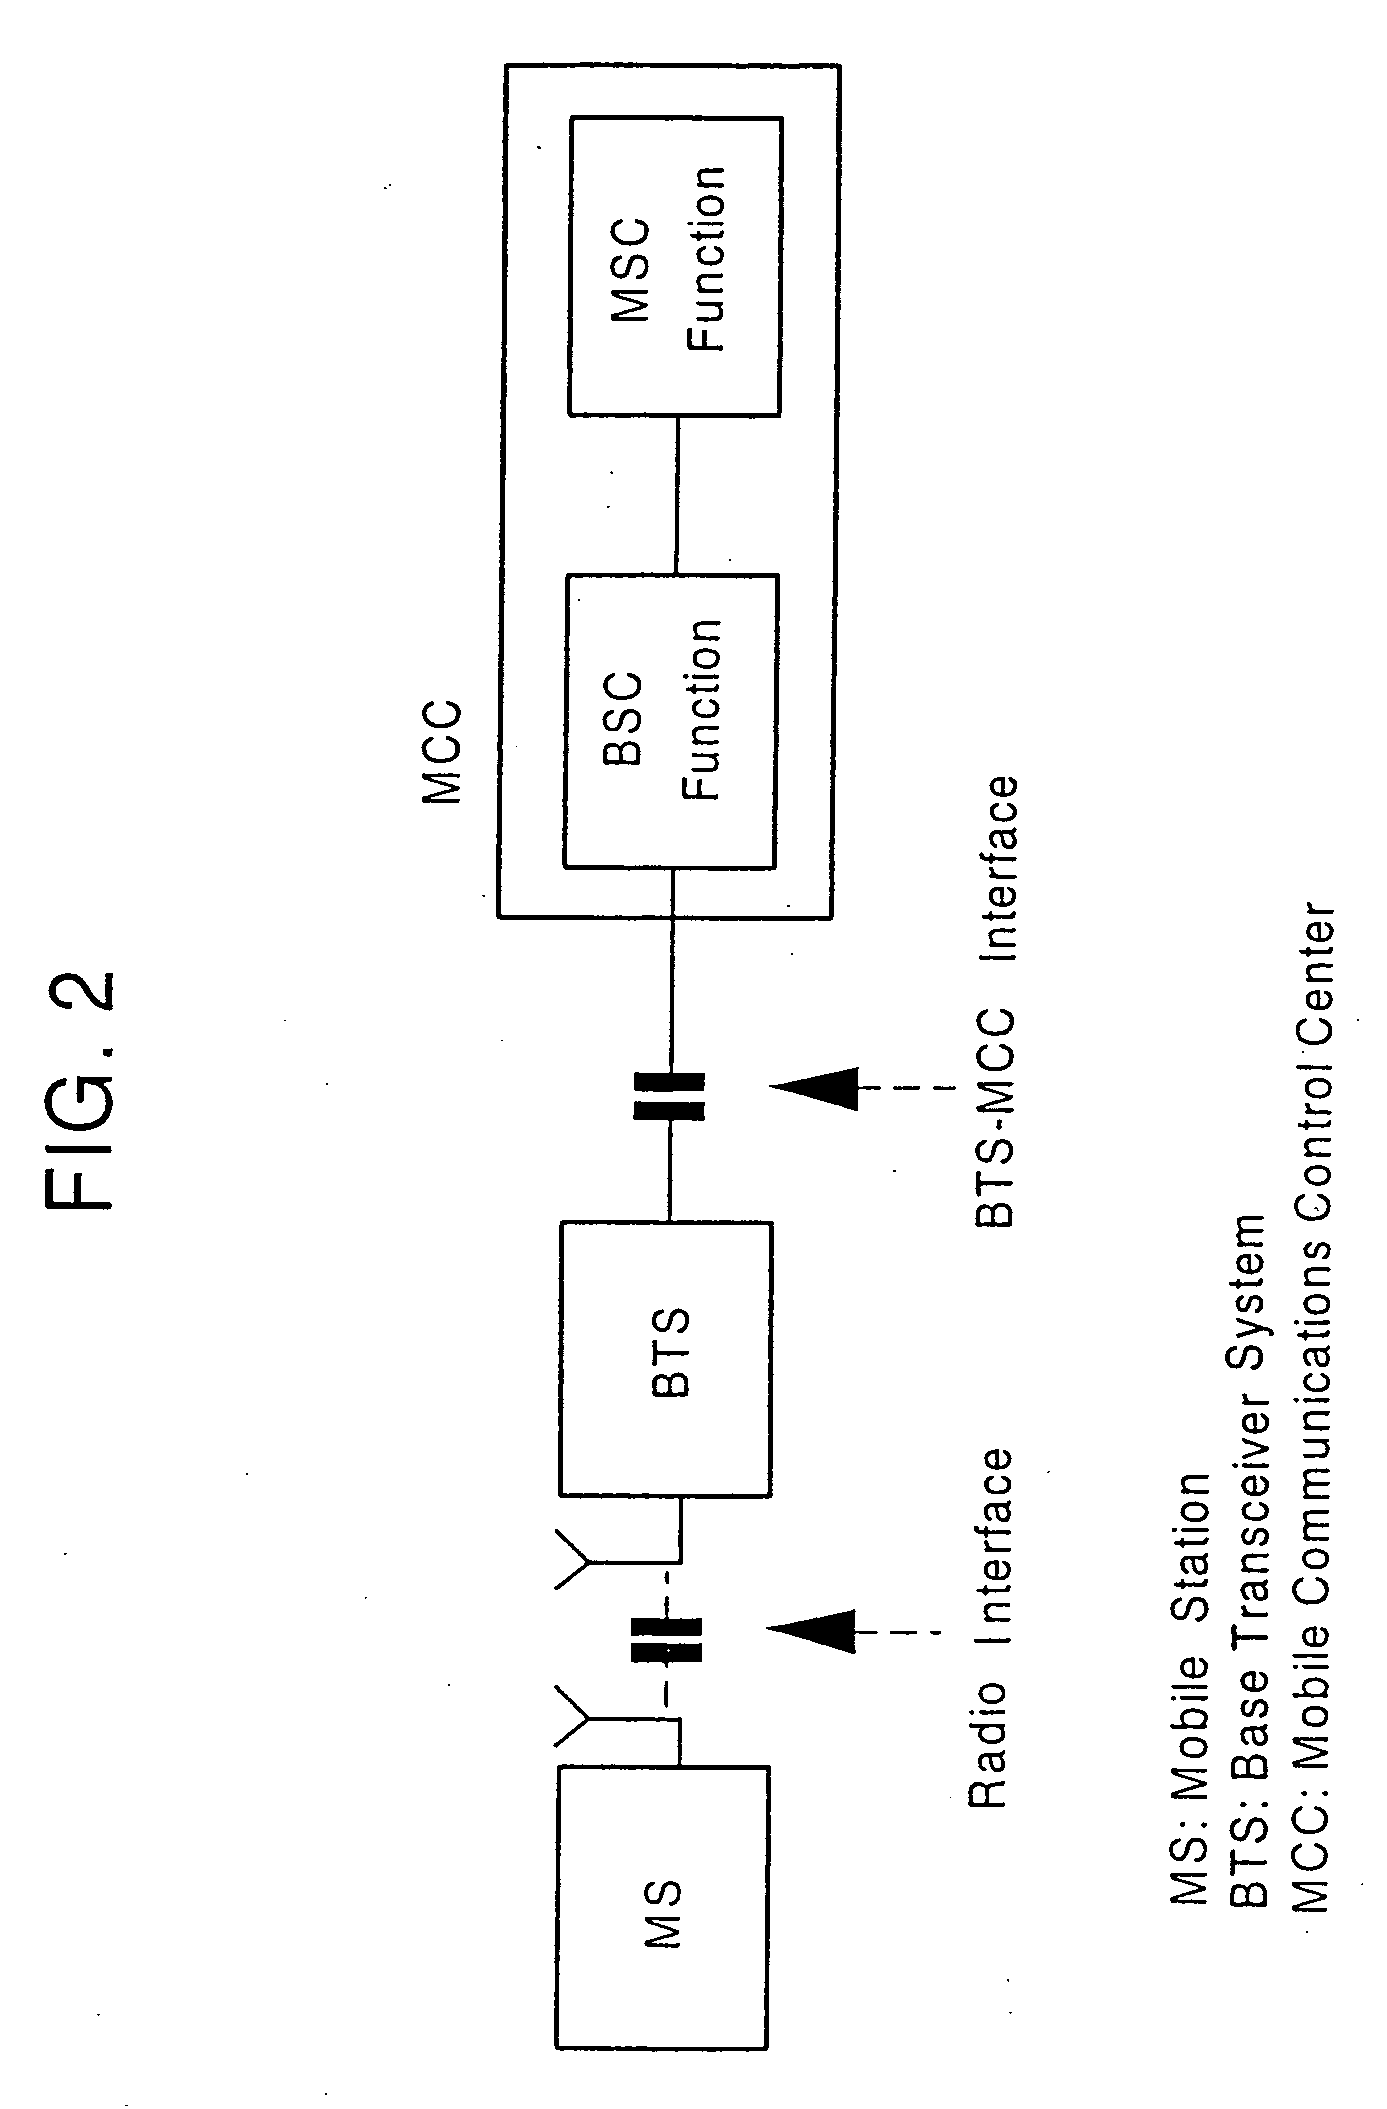 Method and system for mobile communications